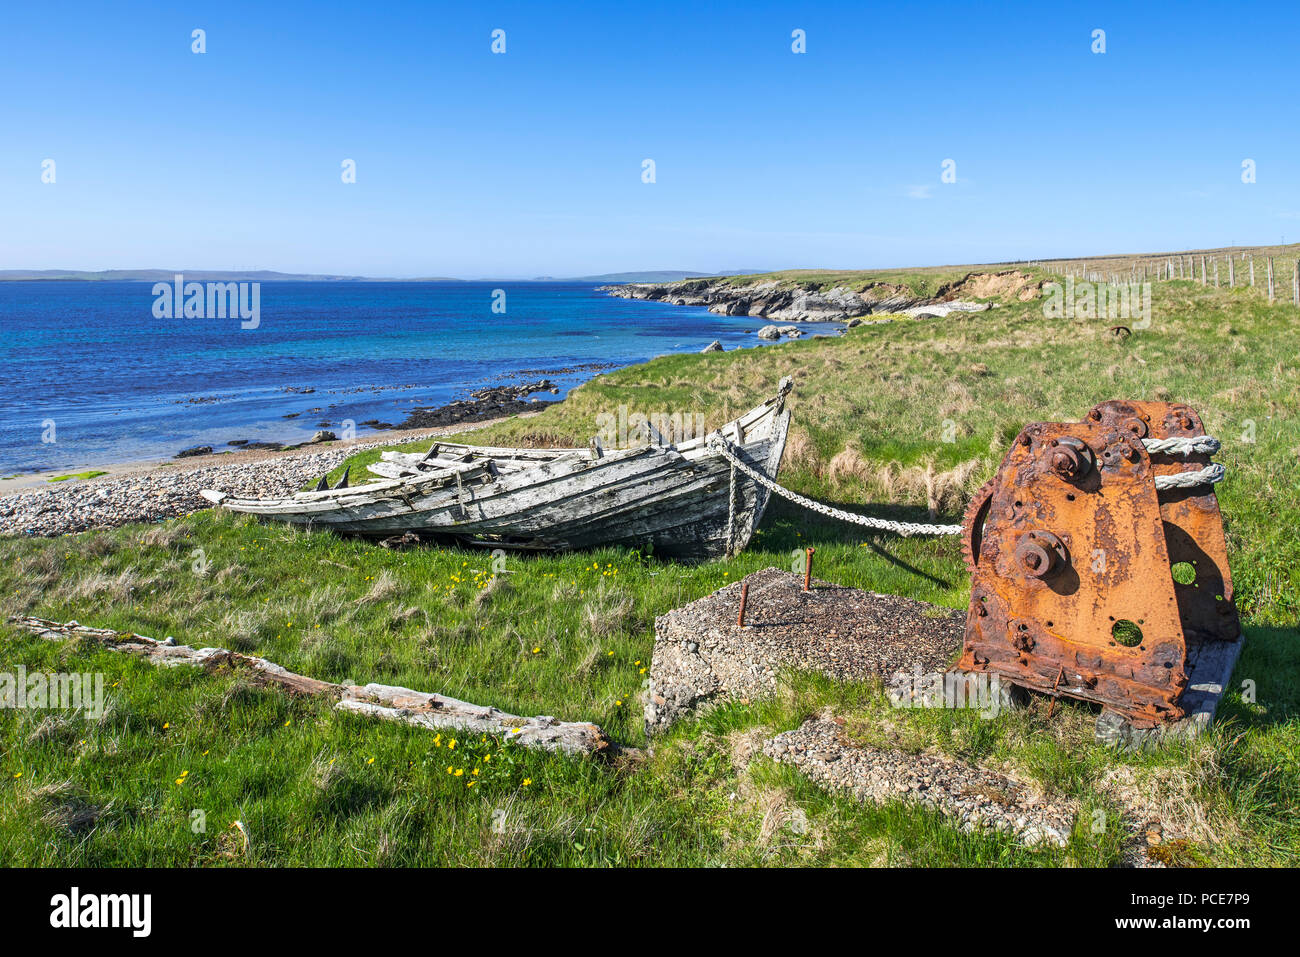 Remains of the old Fetlar flit boat roped to the winding gear / rusty winch at Brough, Fetlar, Shetland Islands, Scotland, UK Stock Photo